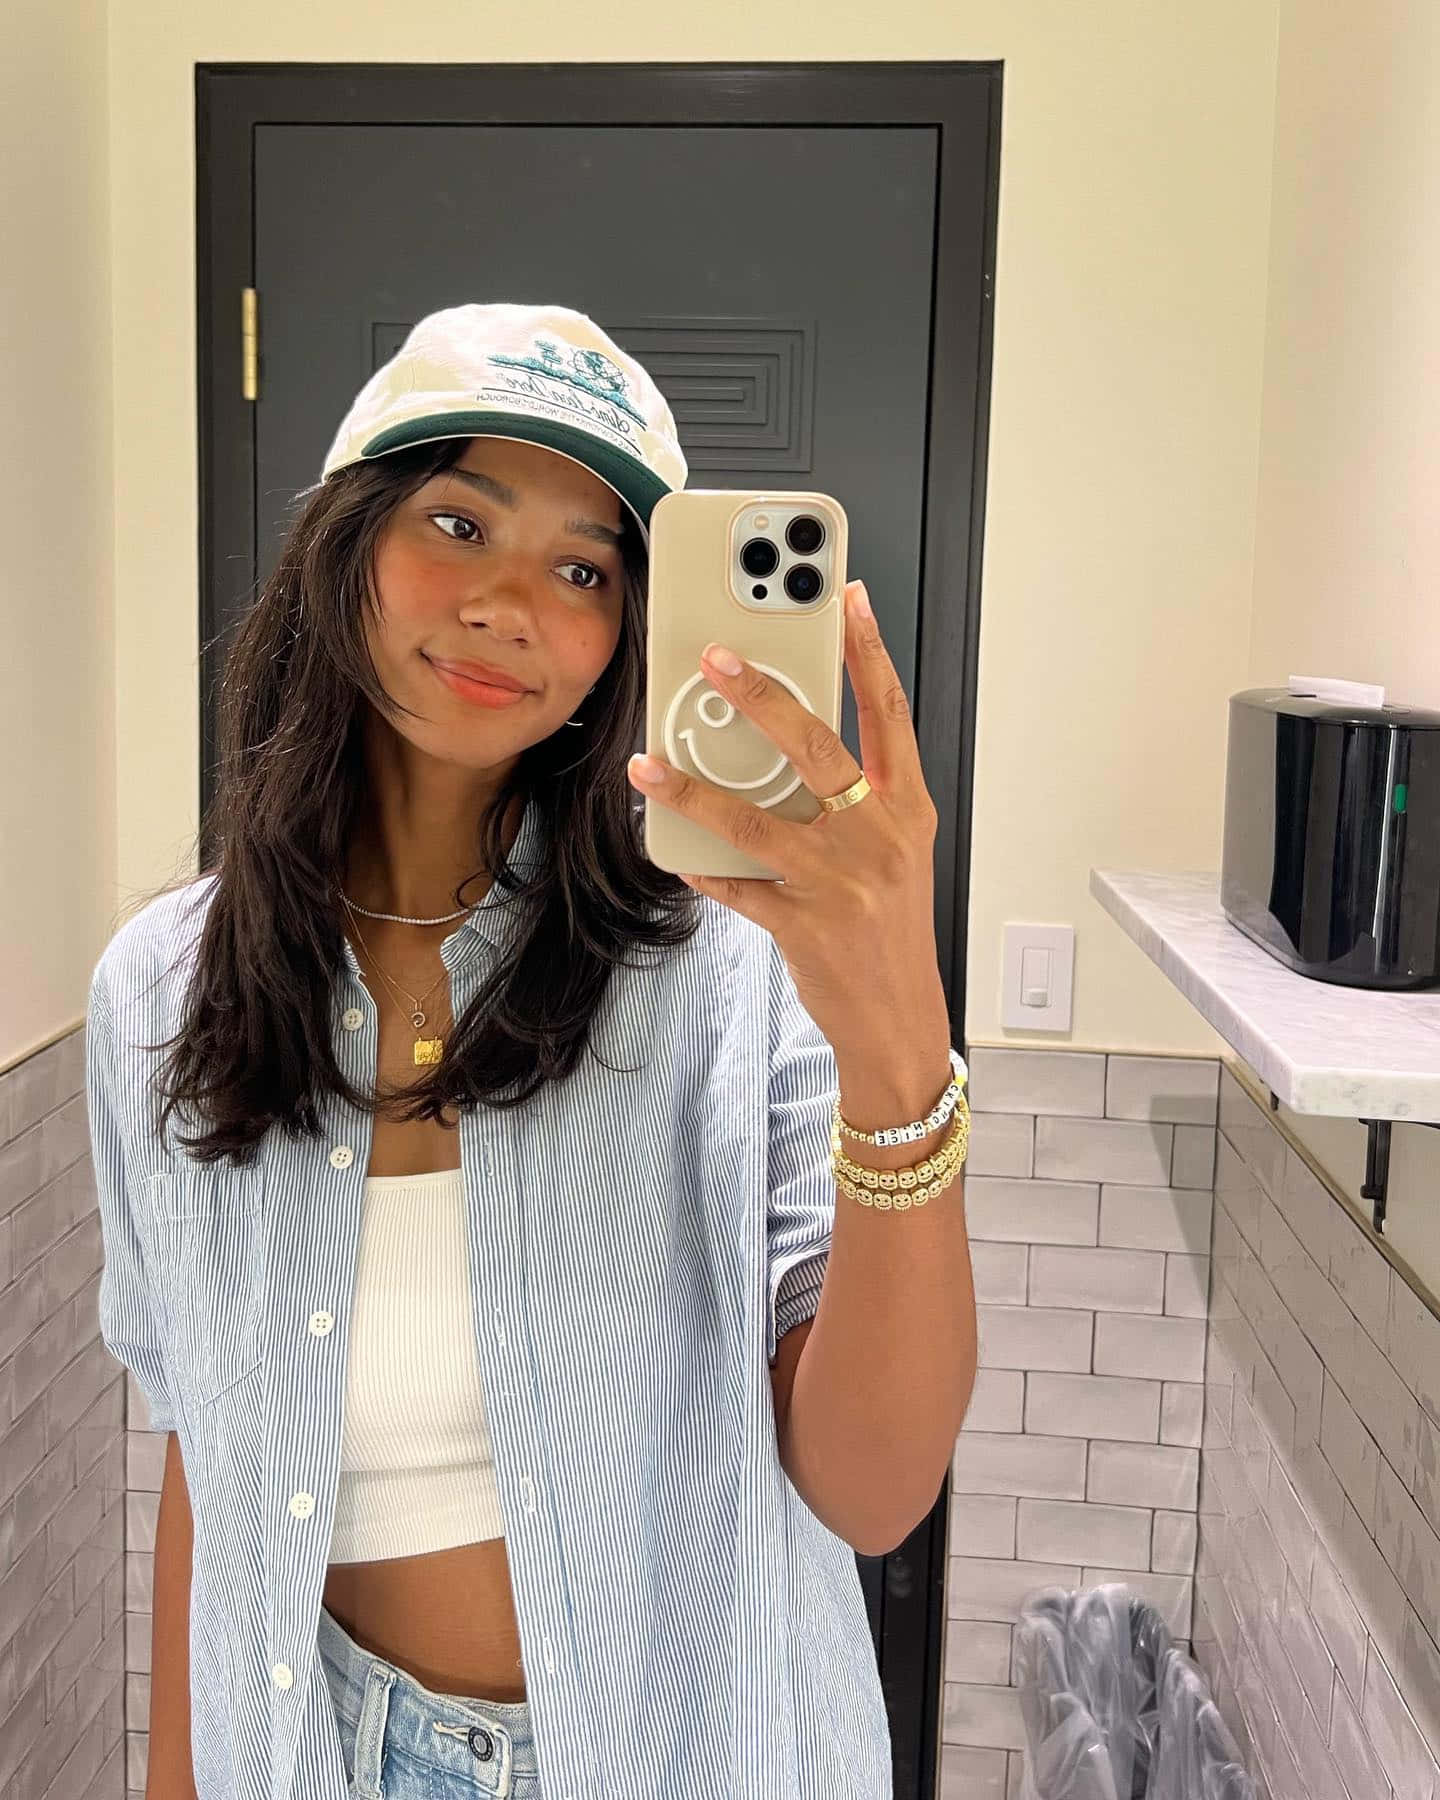 Casual Mirror Selfiewith Hat Wallpaper